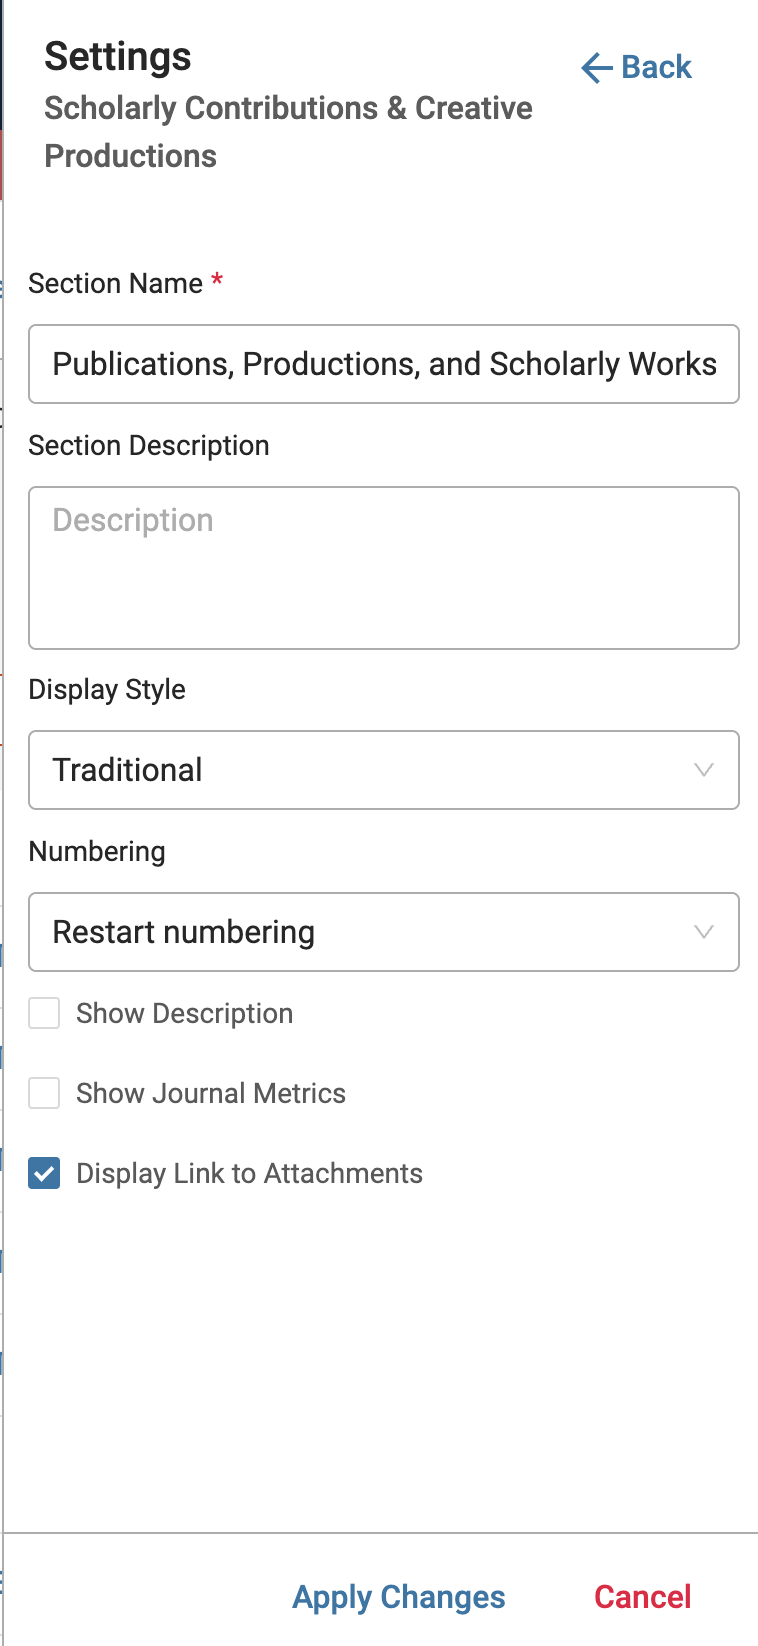 Settings drawer displays with section name field, section description field, display style field, numbering field, and show description, show journal metrics, and display link to attachments checkboxes